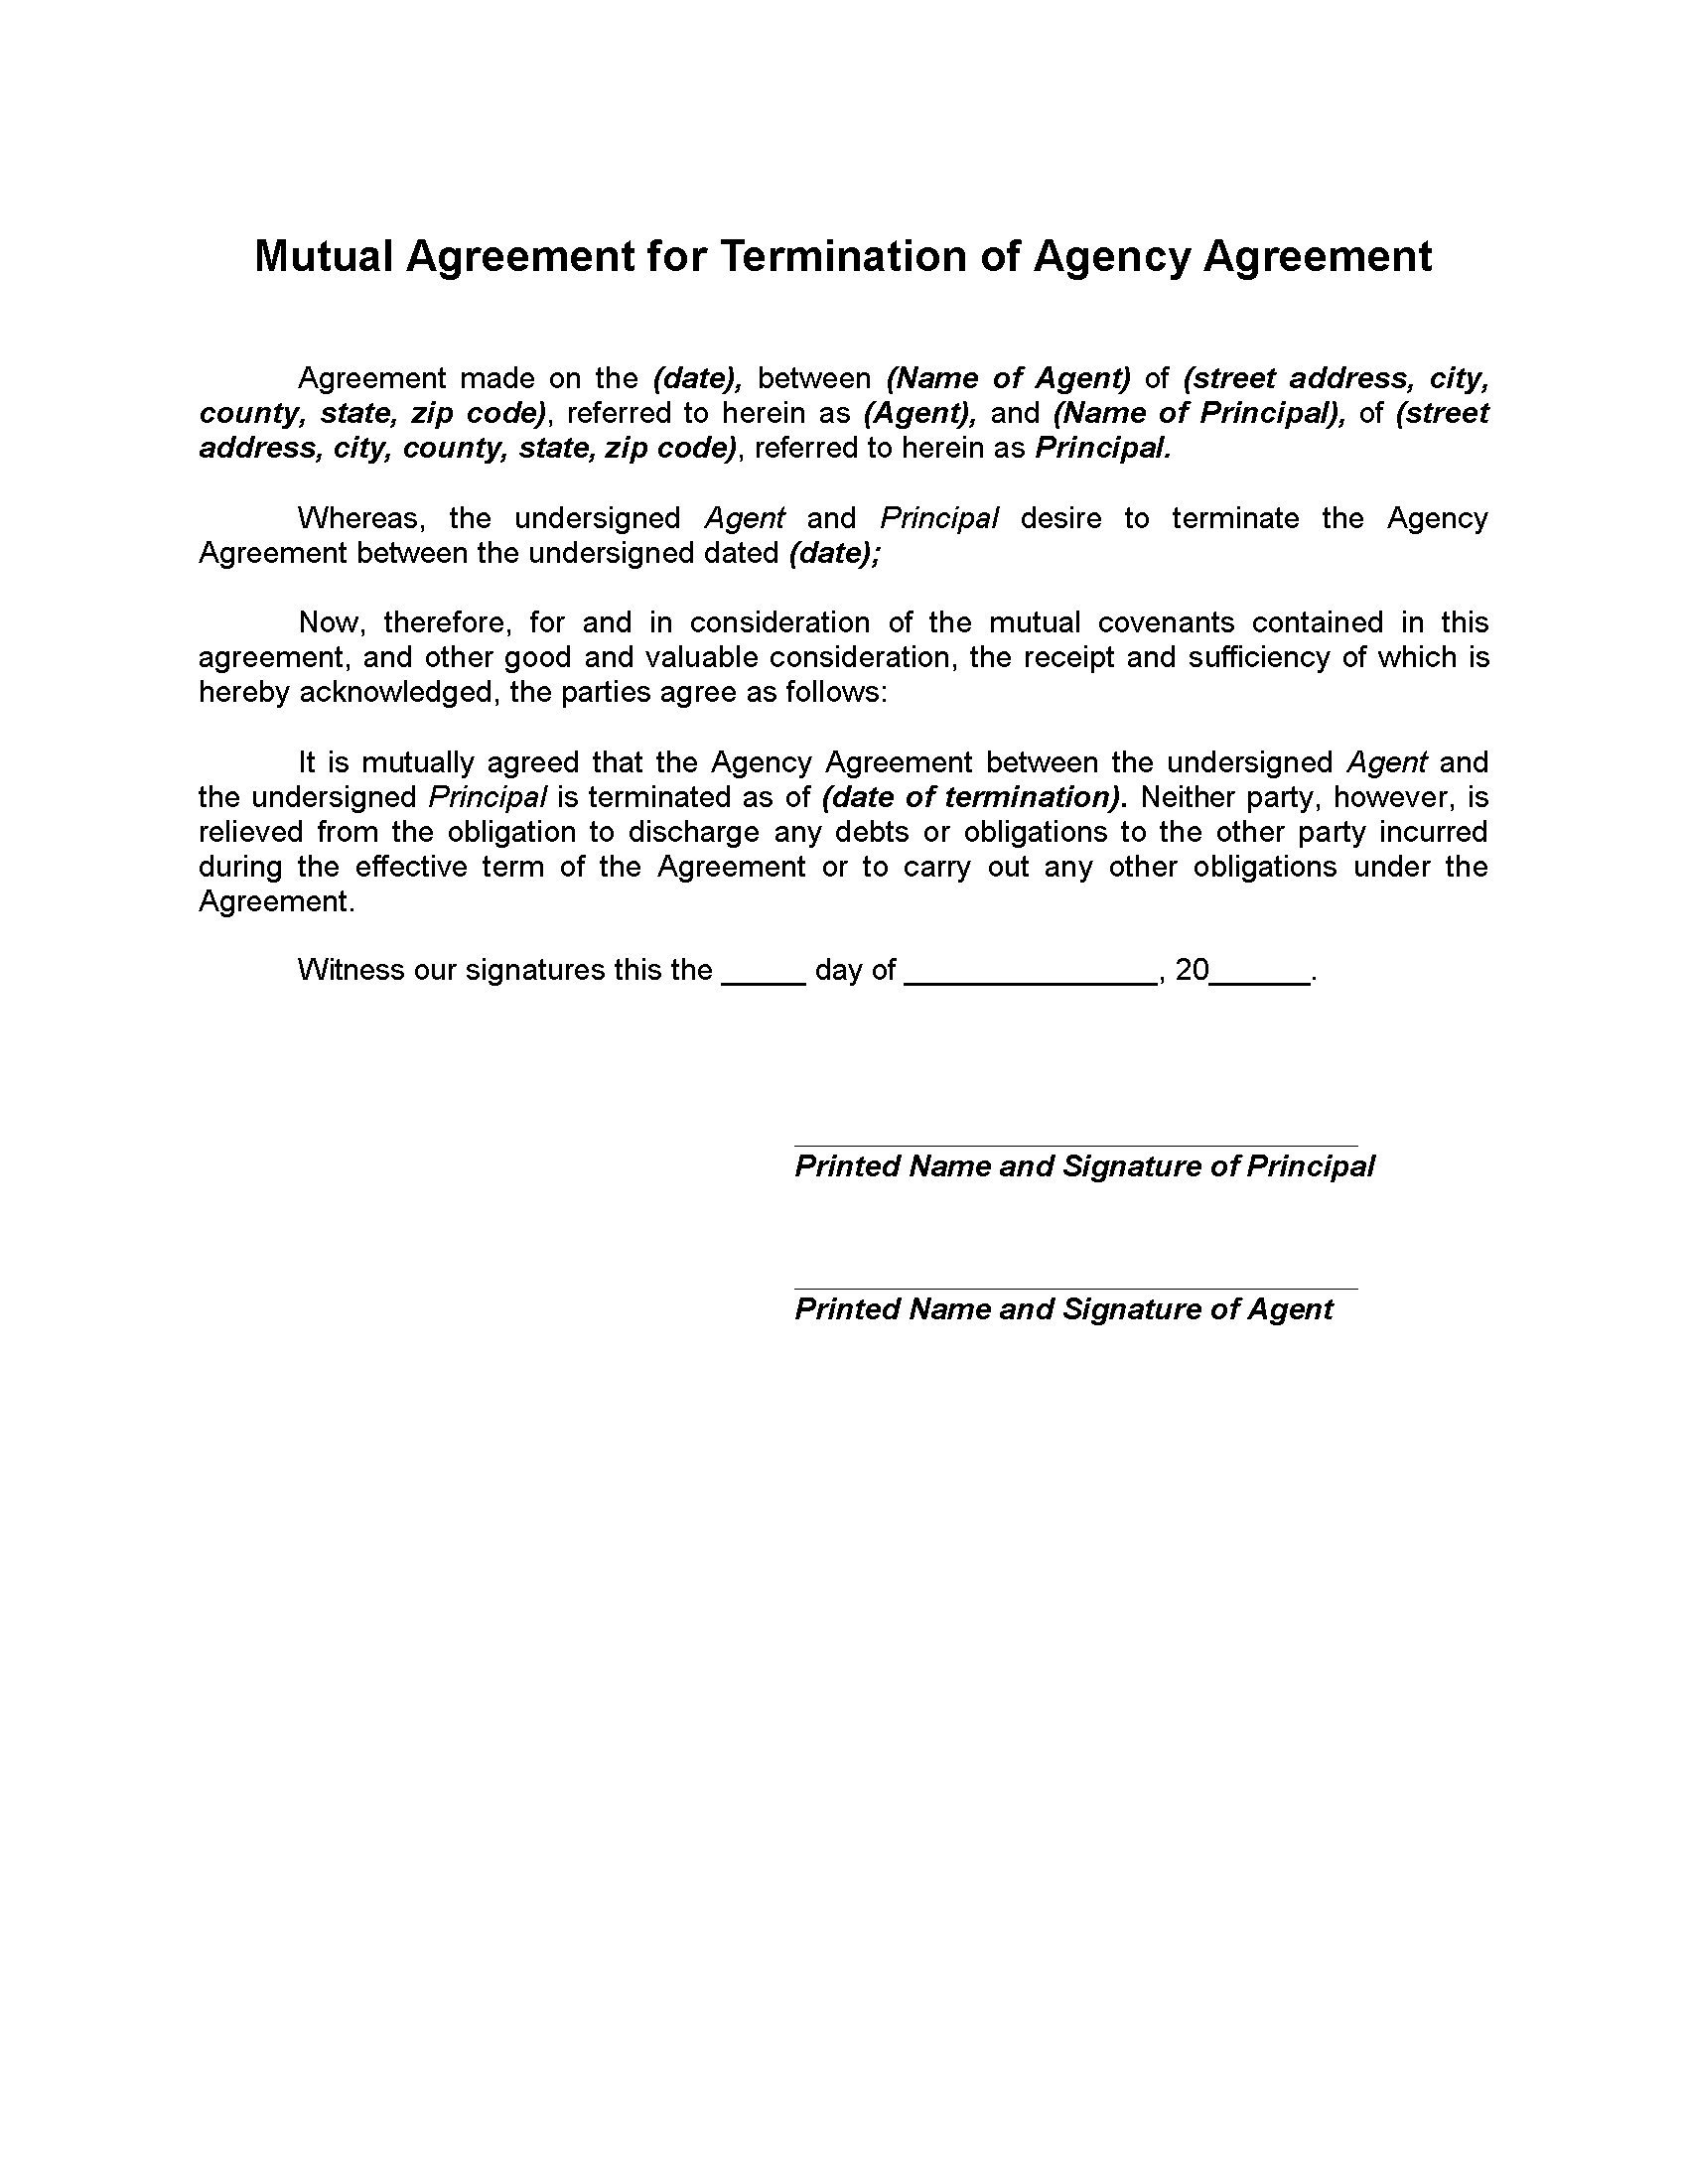 Mutual Termination of Agency Agreement